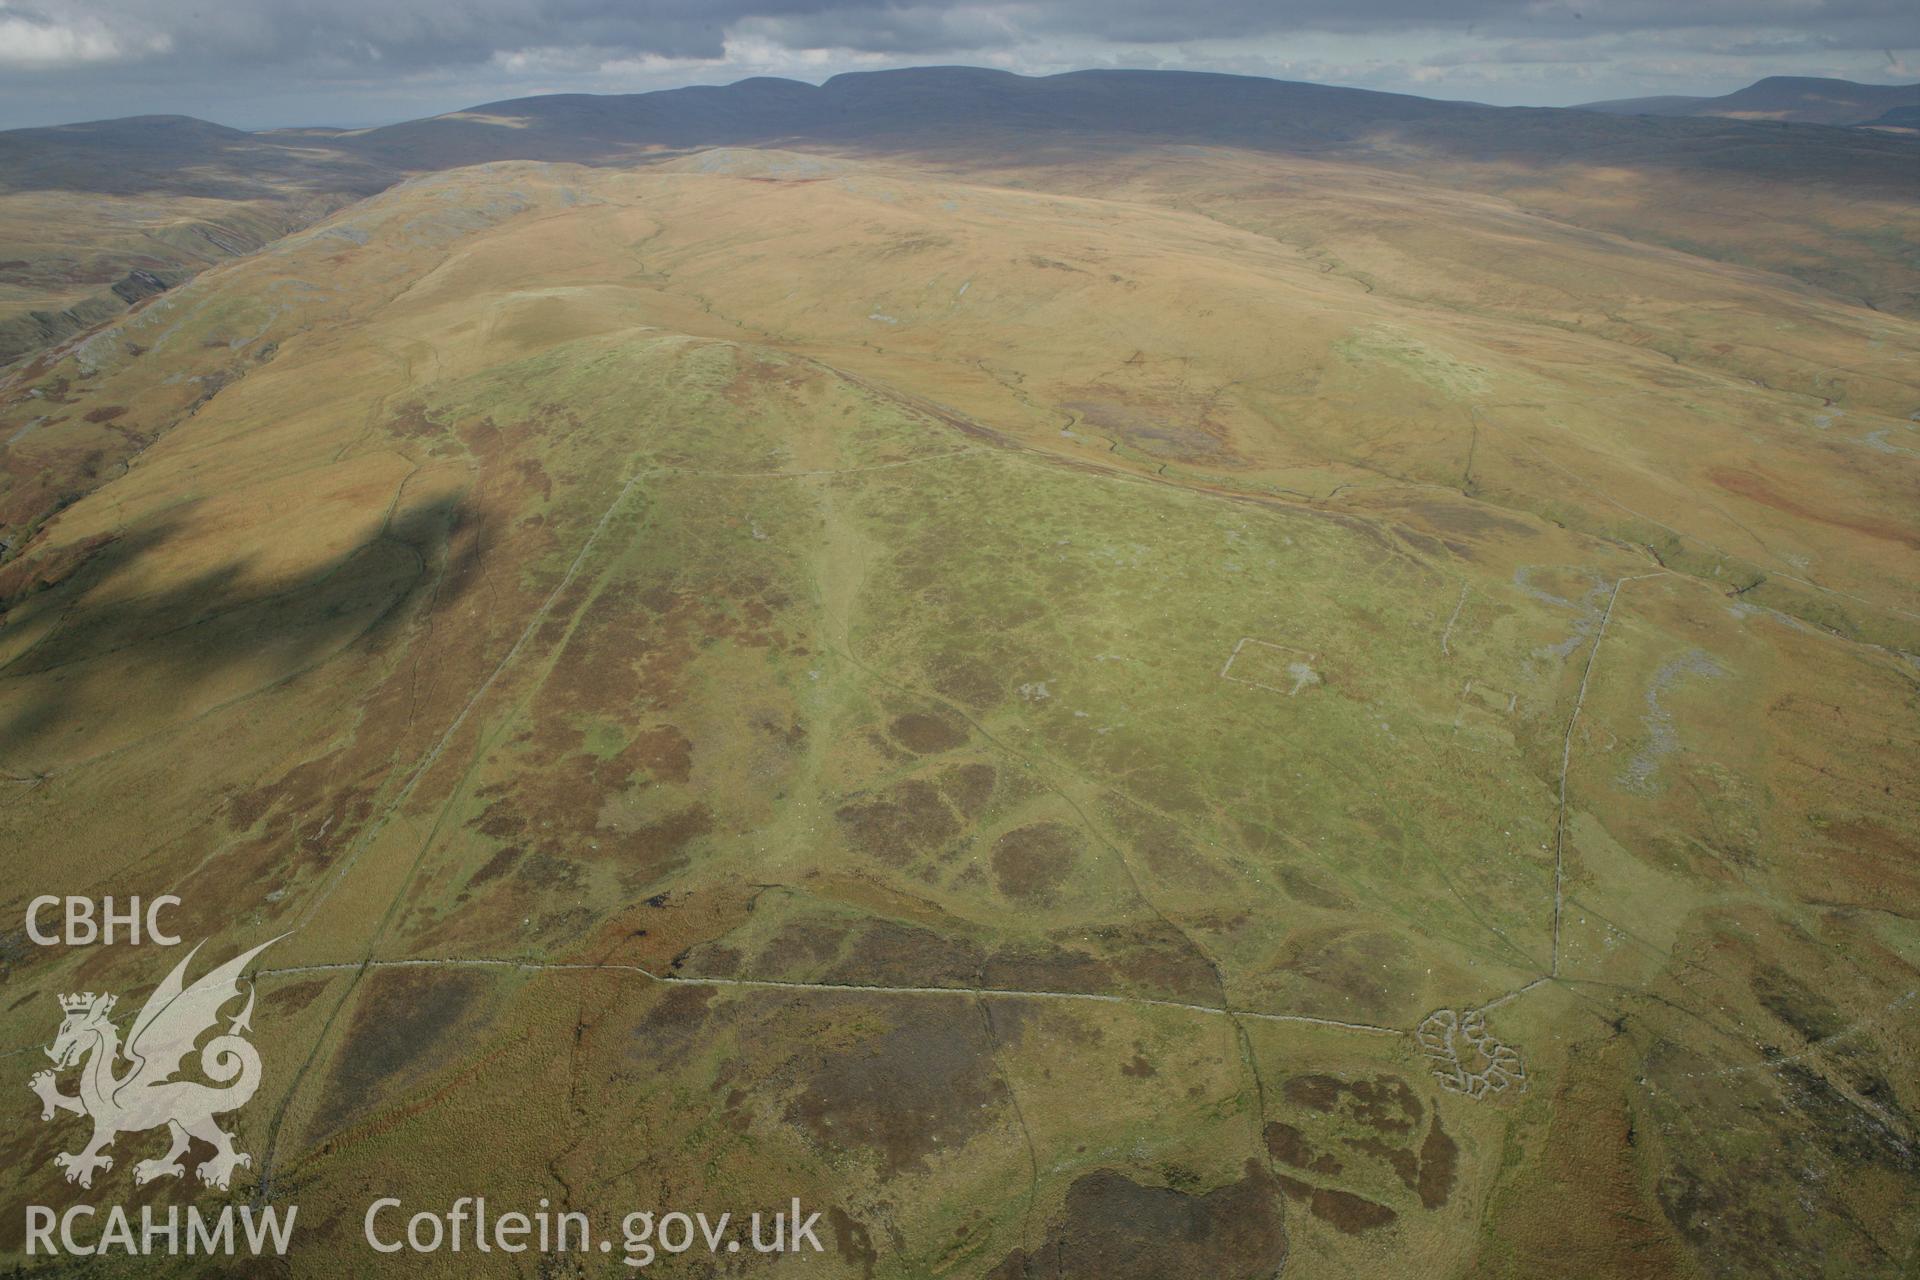 RCAHMW colour oblique aerial photograph of a multi-cellular sheepfold southeast of Dorwen. Taken on 14 October 2009 by Toby Driver